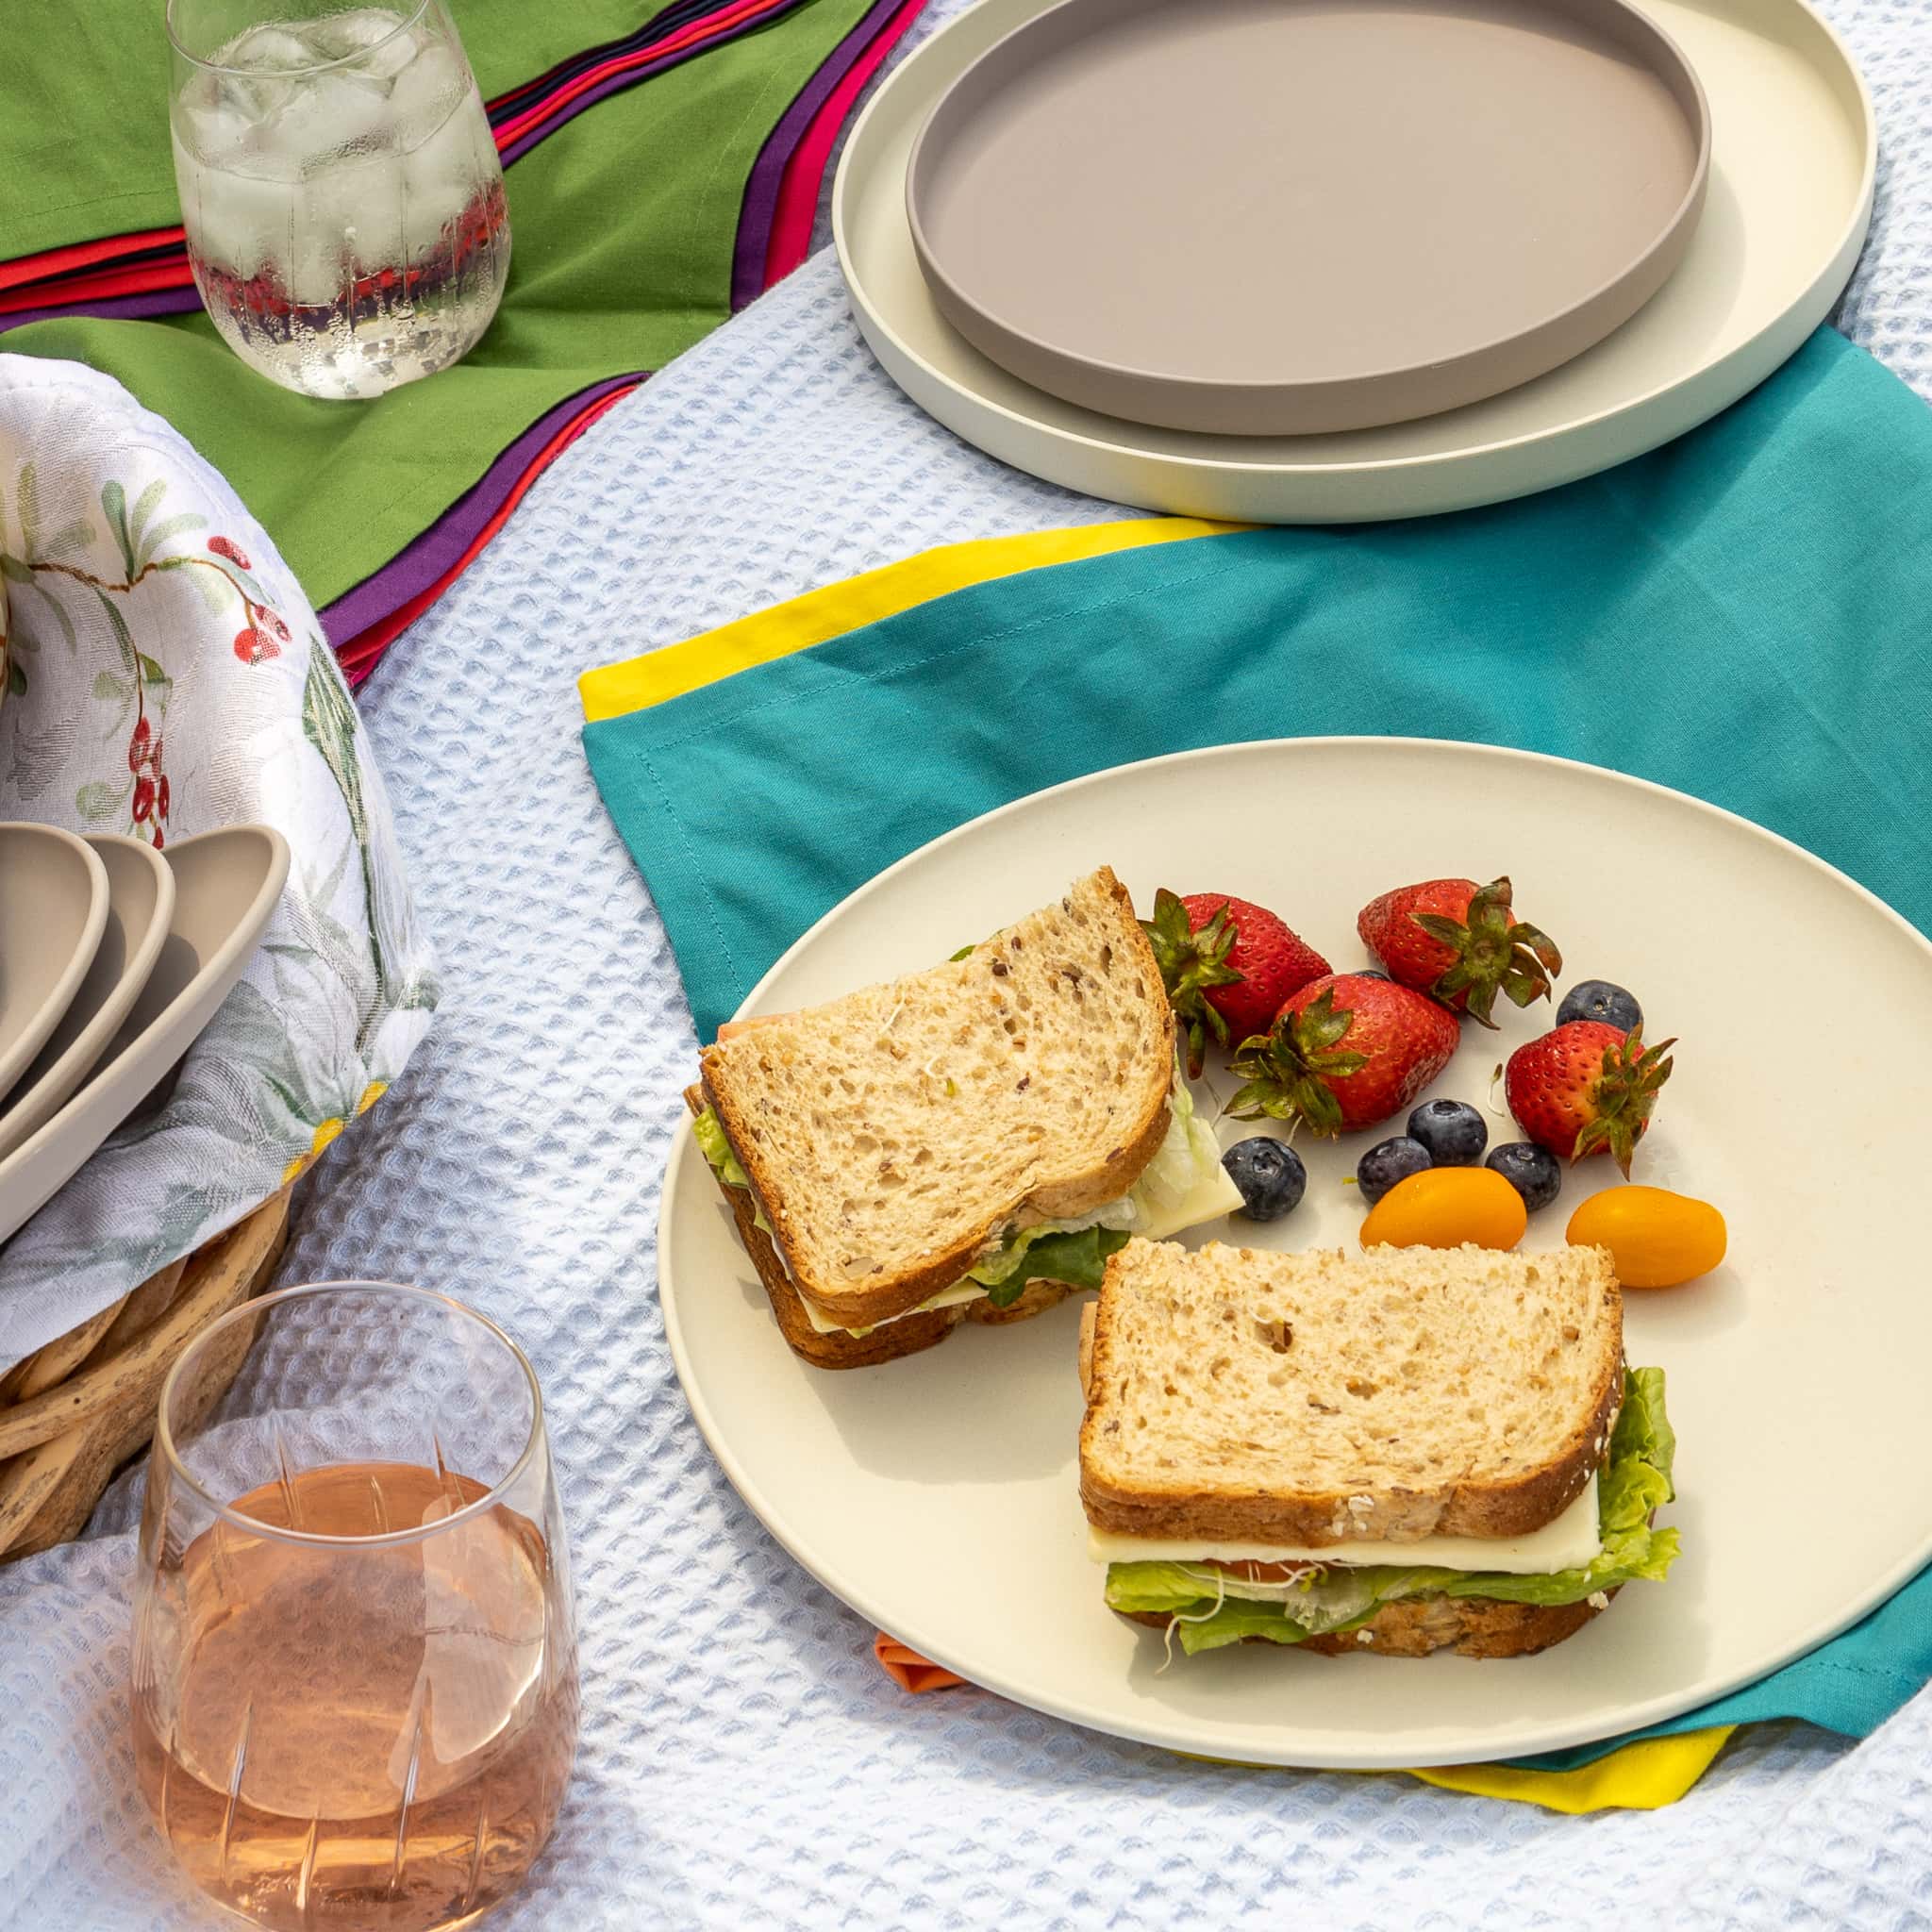 Summer picnic spread with sandwiches and strawberries on off-white non-toxic plate.